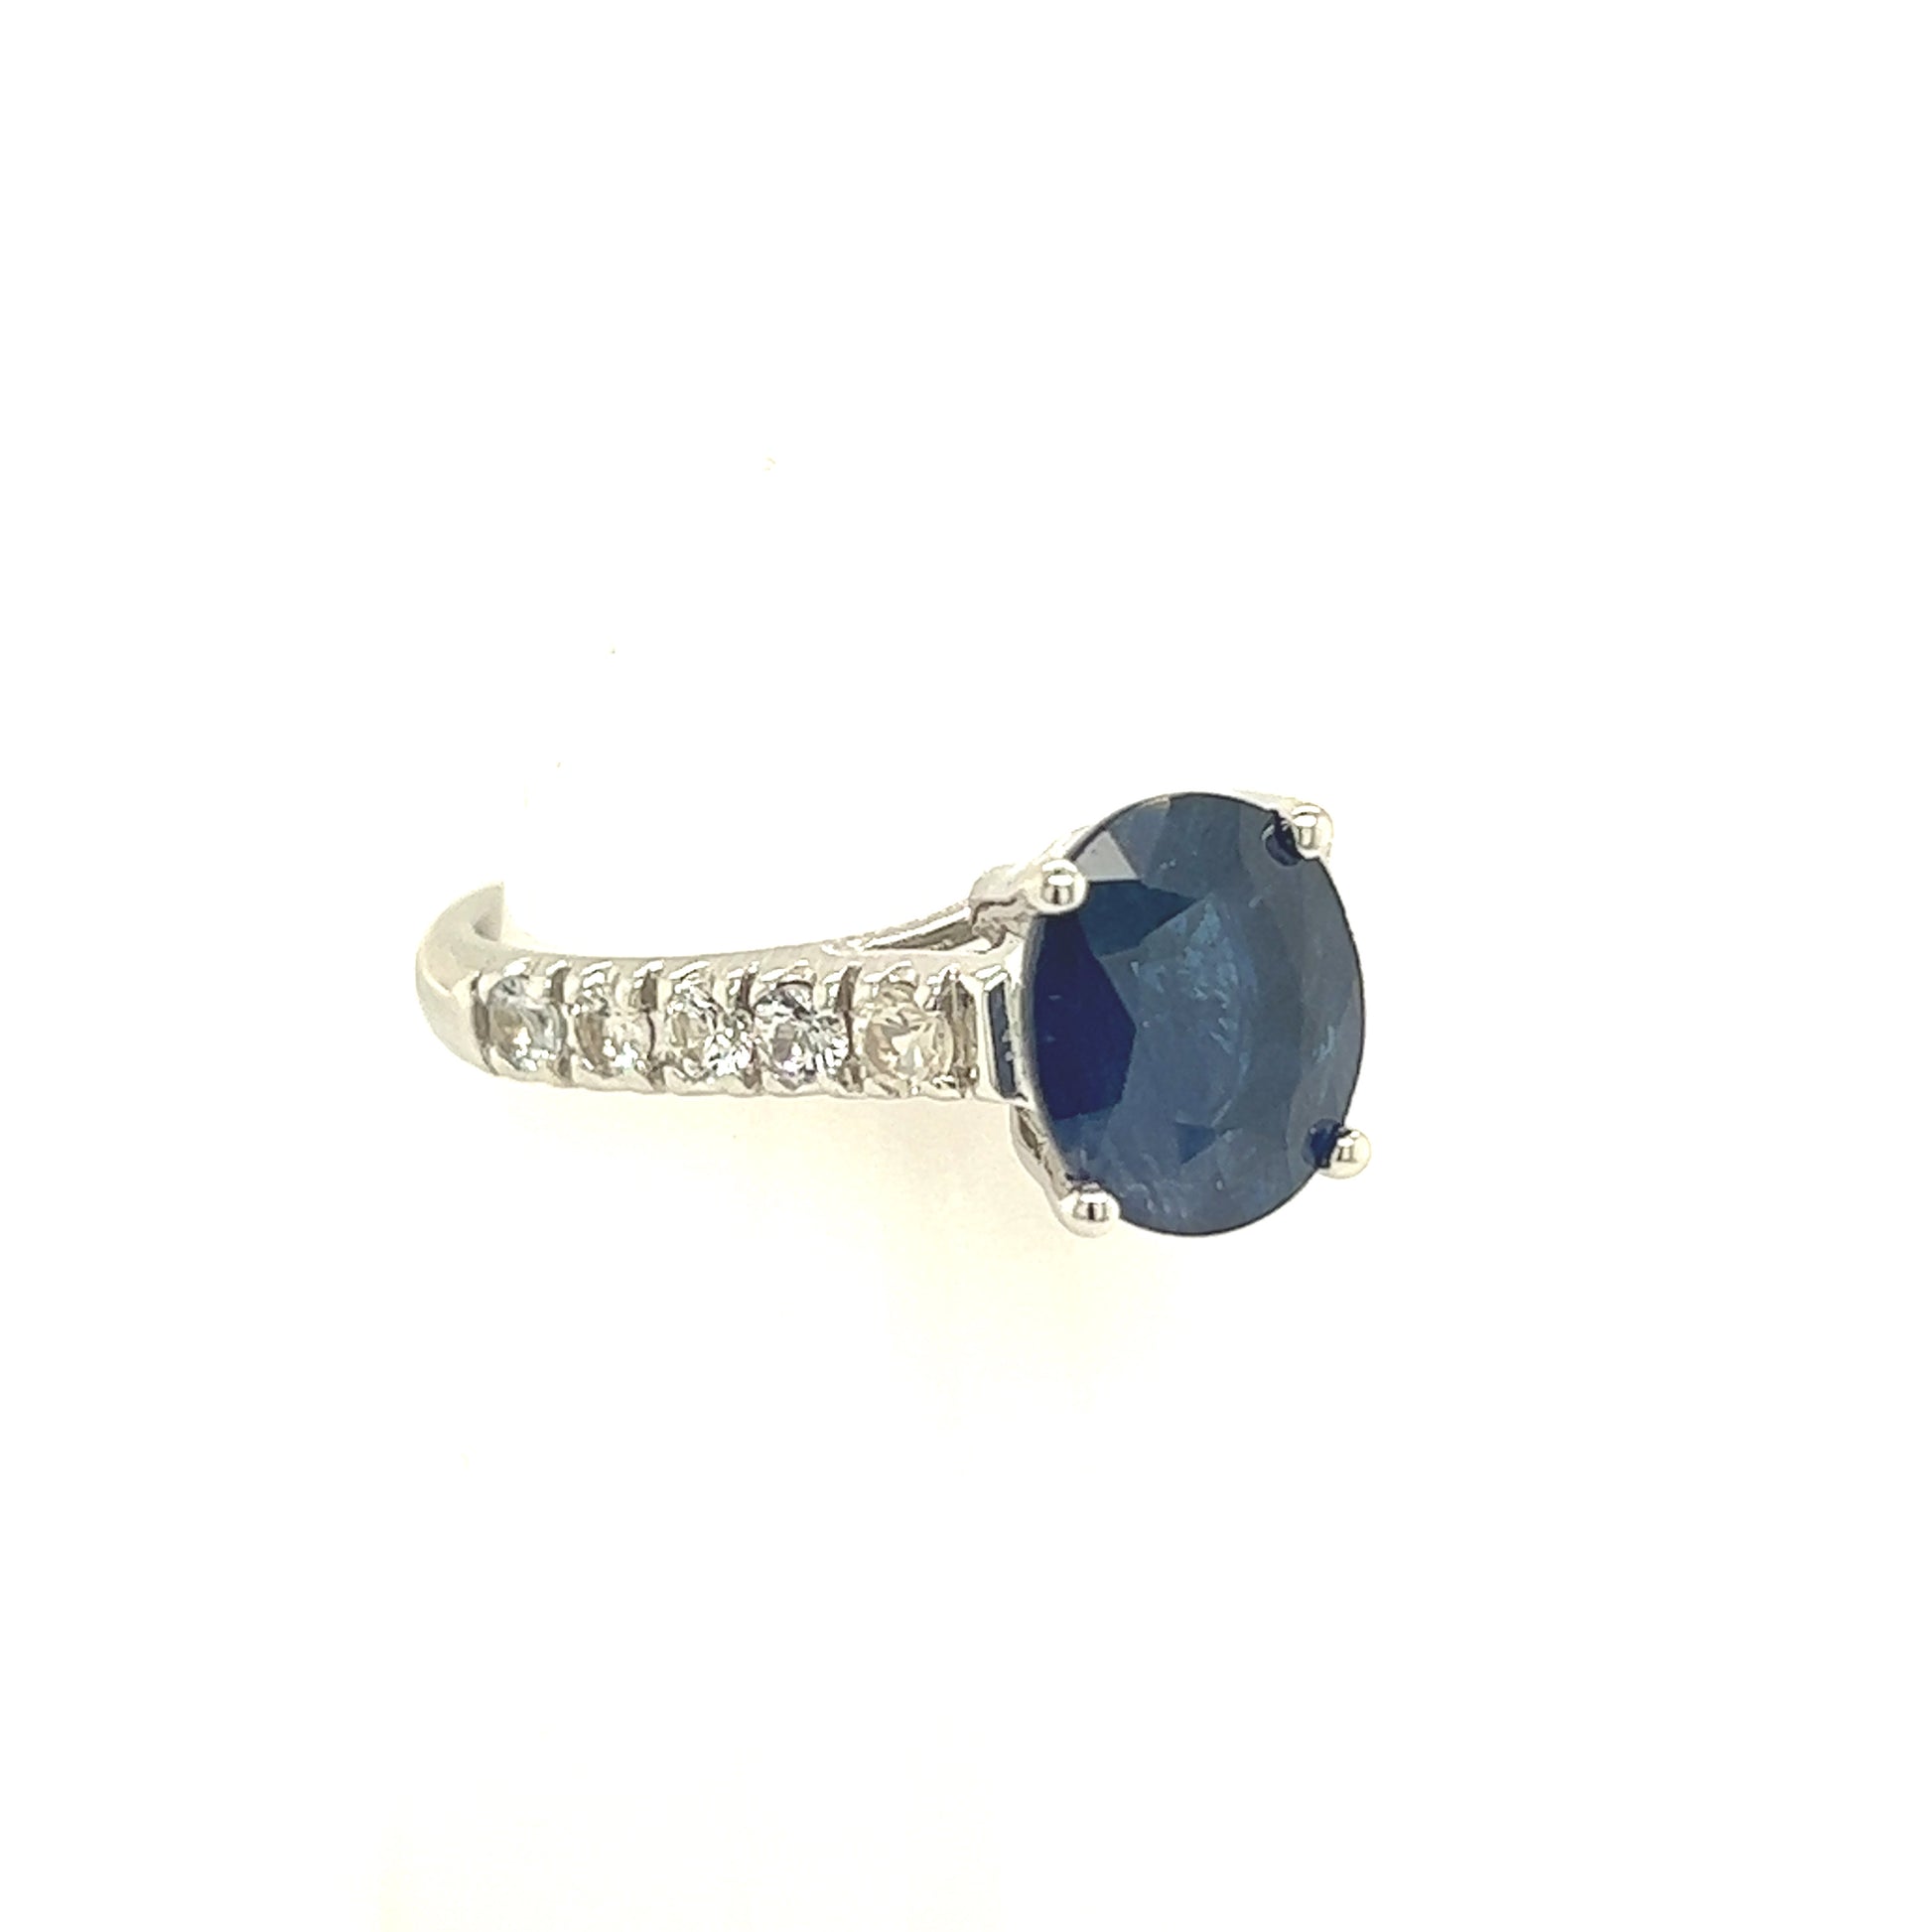 Natural Sapphire Diamond Ring Size 7 14k W Gold 3 TCW Certified $2,990 216680